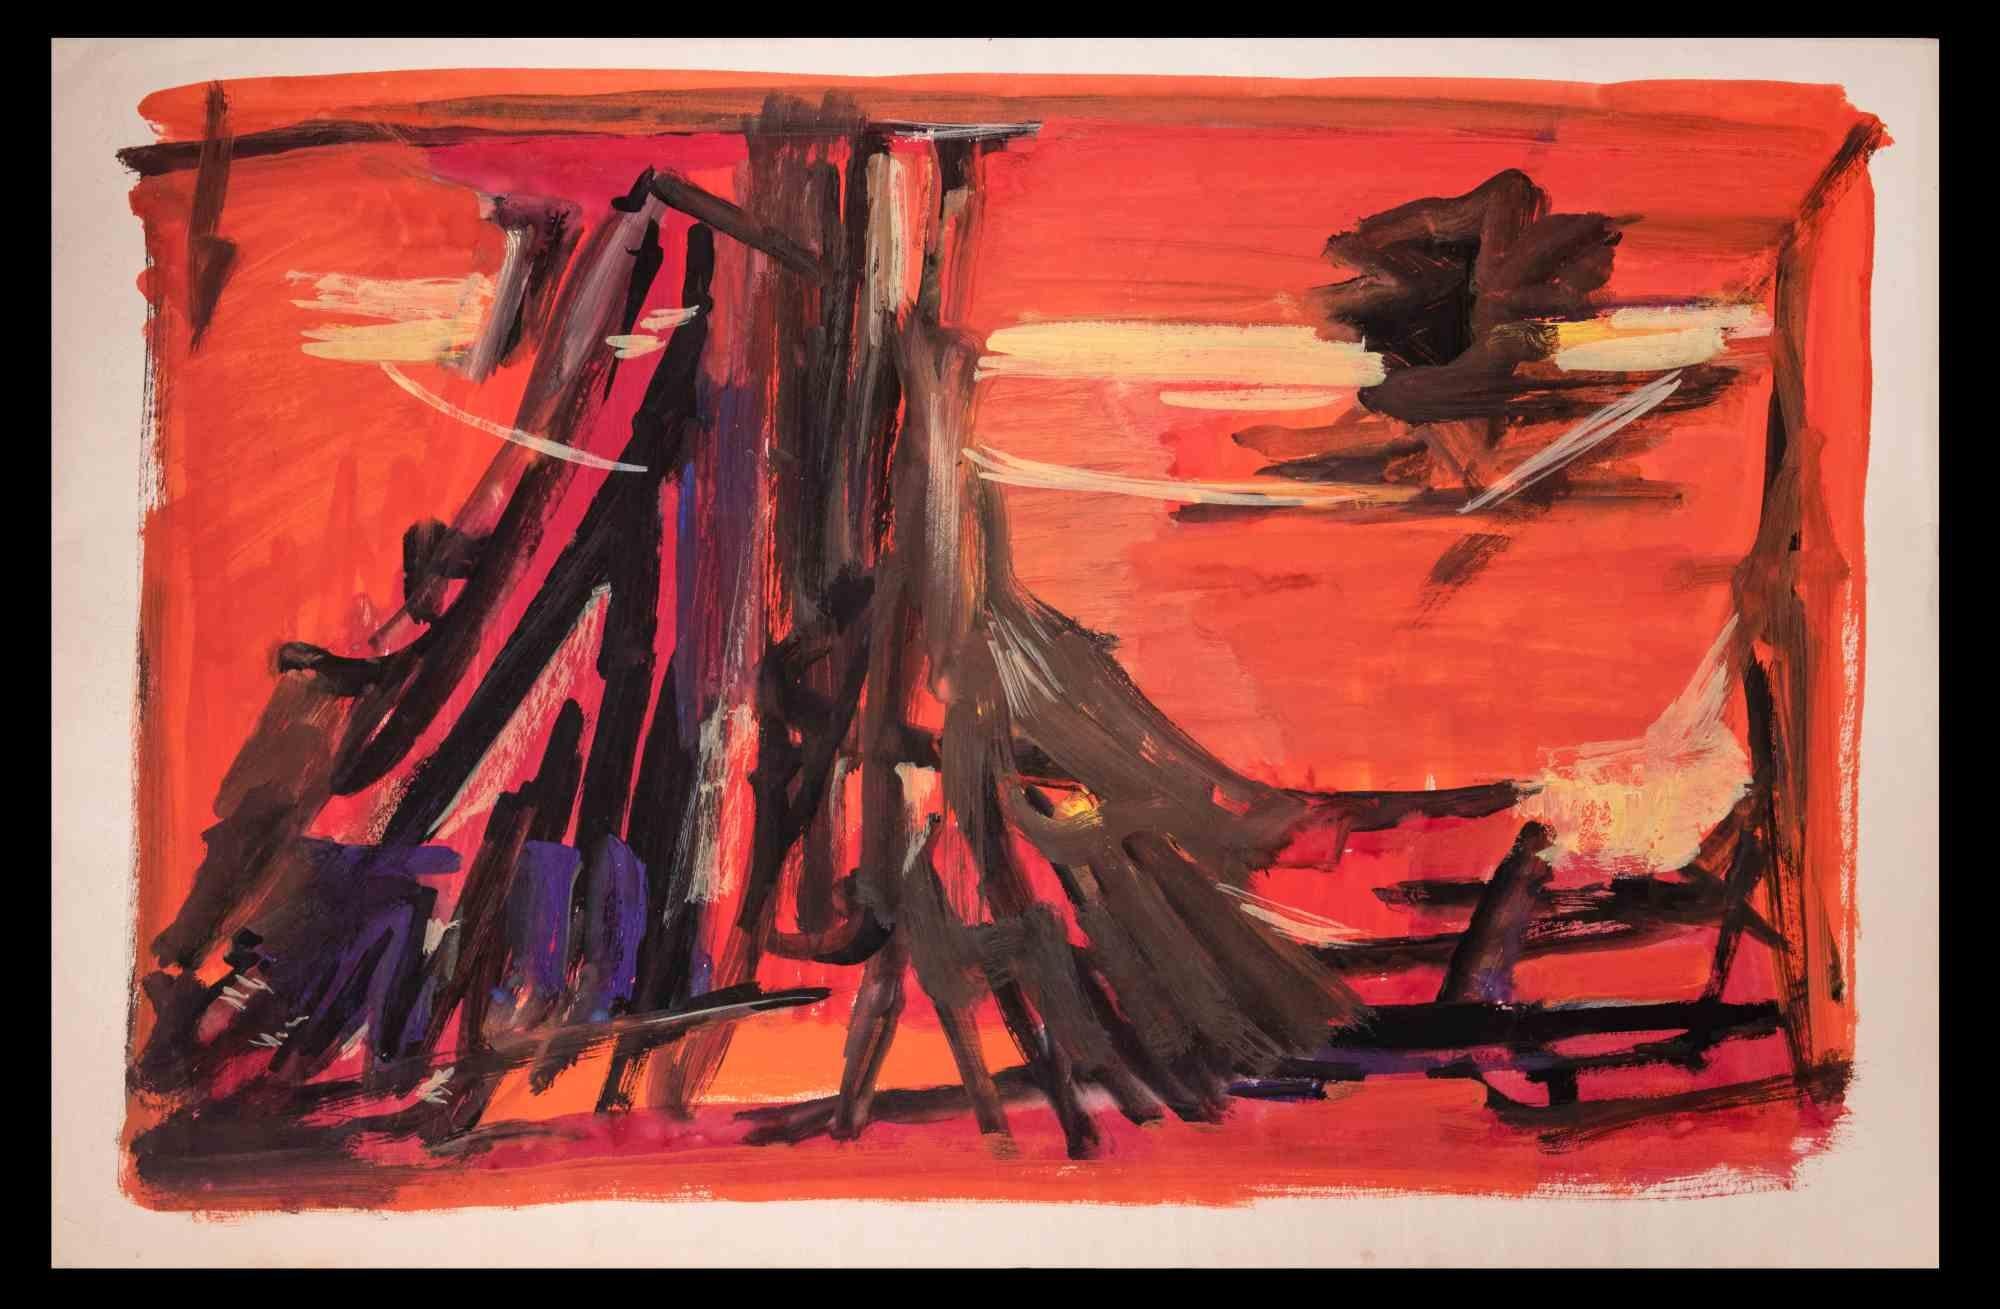 Abstract Composition in Red - Paint by Émile Marze - 1970s - Painting by Emile Marze  (born 1930)